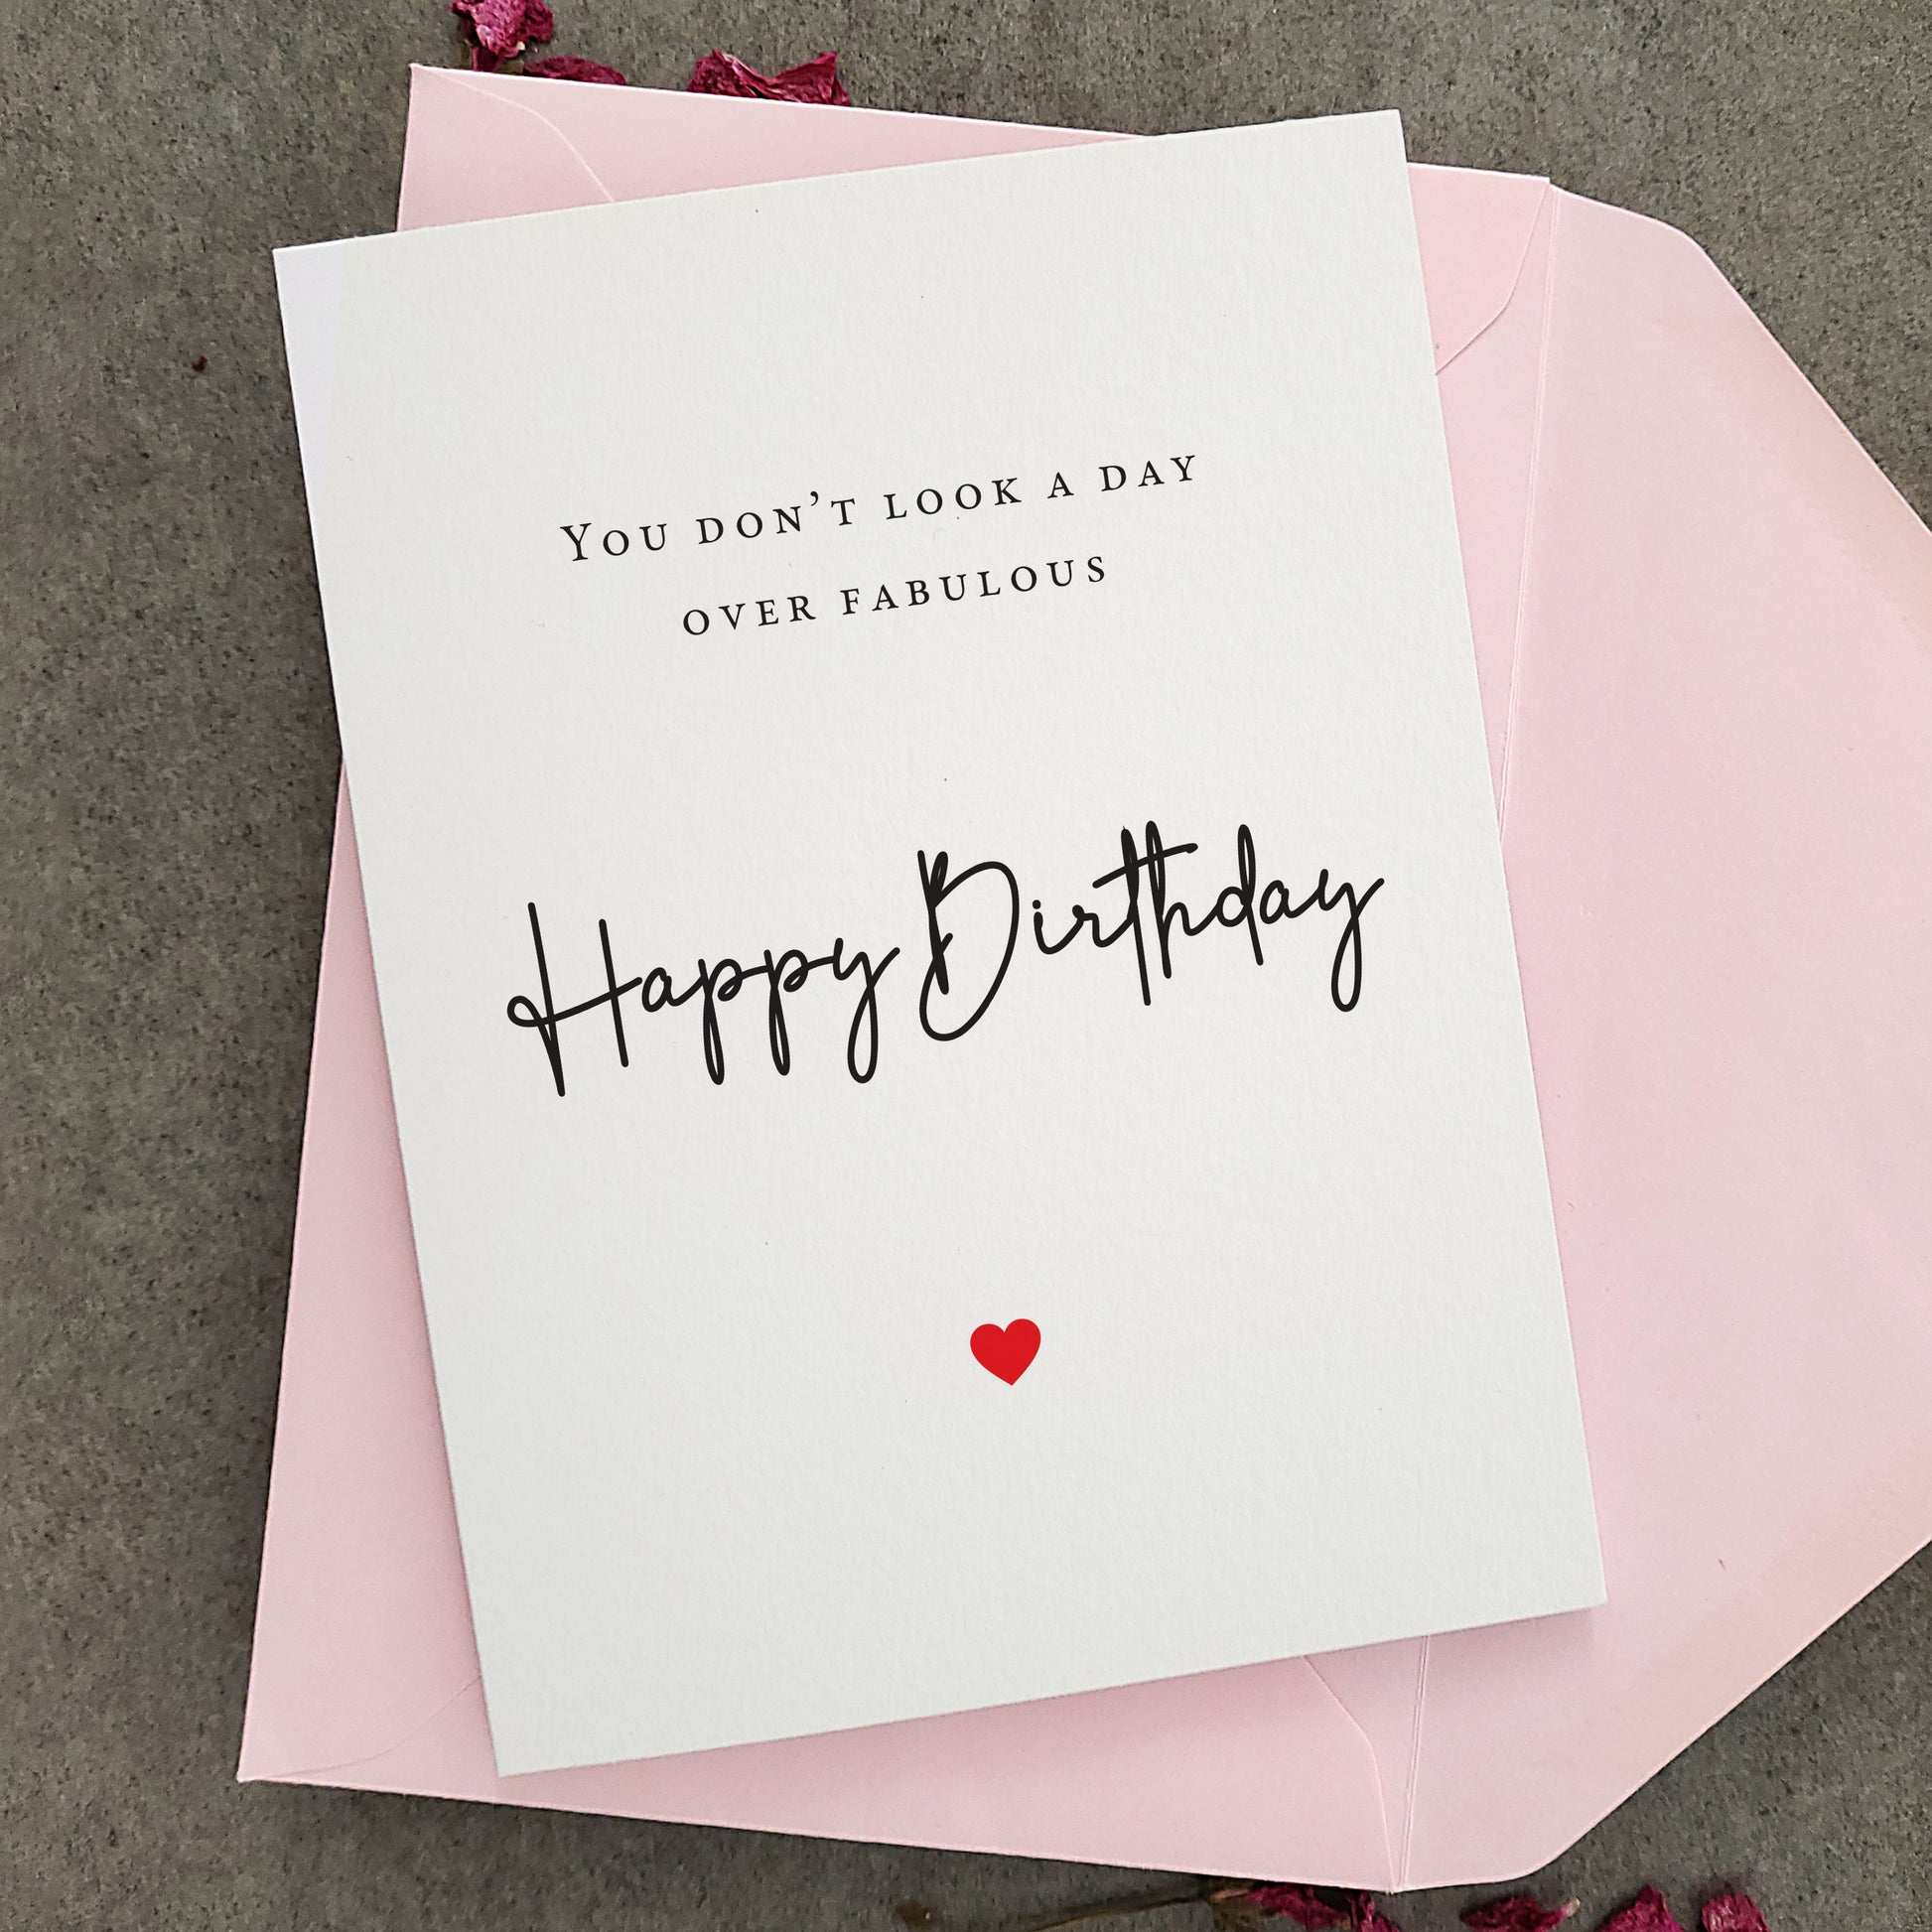 You don't look a day over fabulous birthday greeting card - XOXOKristen